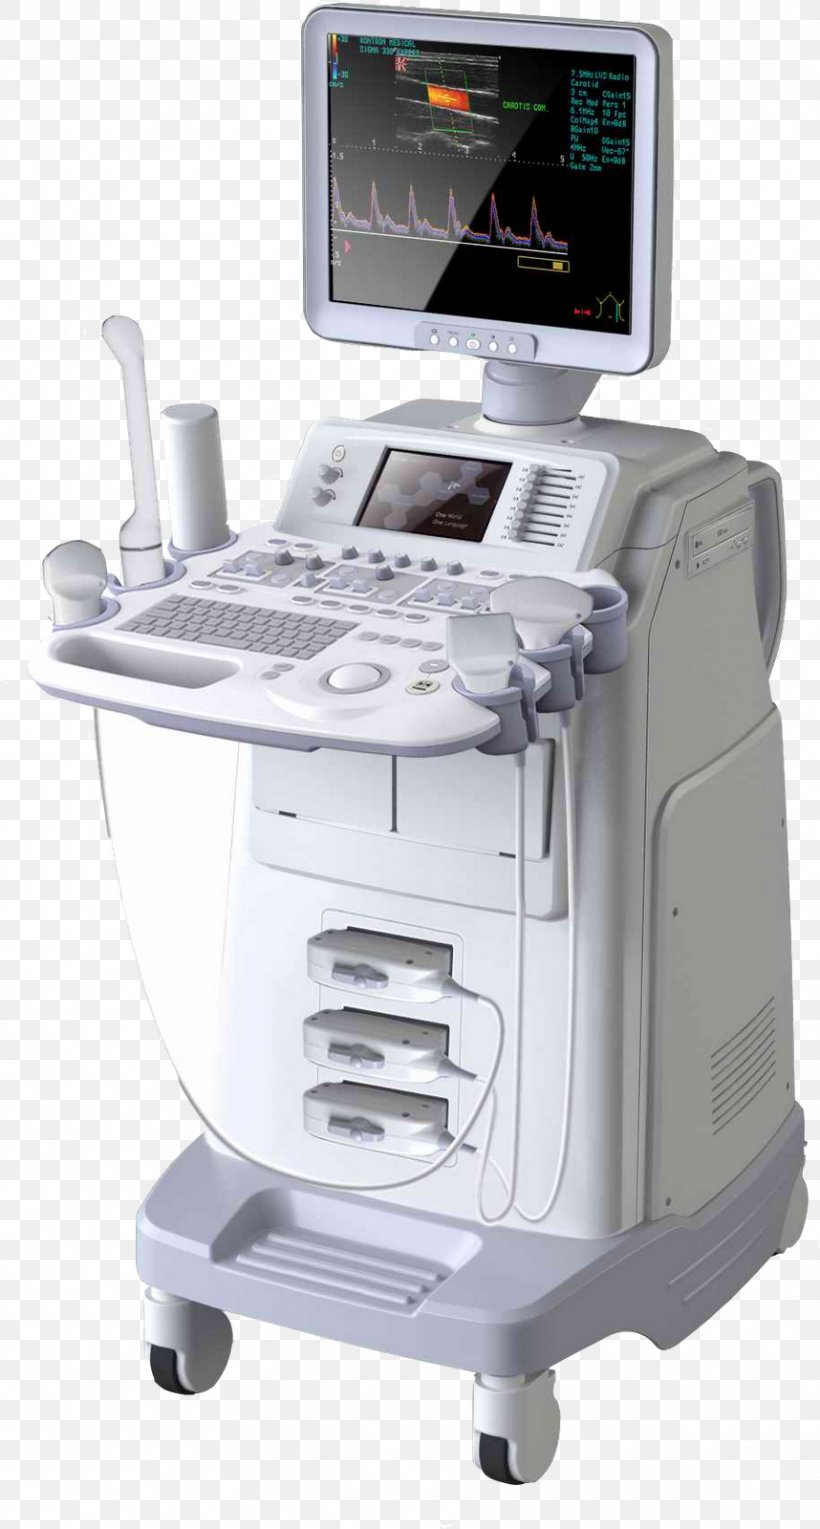 Ultrasonography 3D Ultrasound Doppler Echocardiography Medical Equipment, PNG, 858x1600px, 3d Ultrasound, Ultrasonography, Anaesthetic Machine, Doppler Echocardiography, Electronic Device Download Free